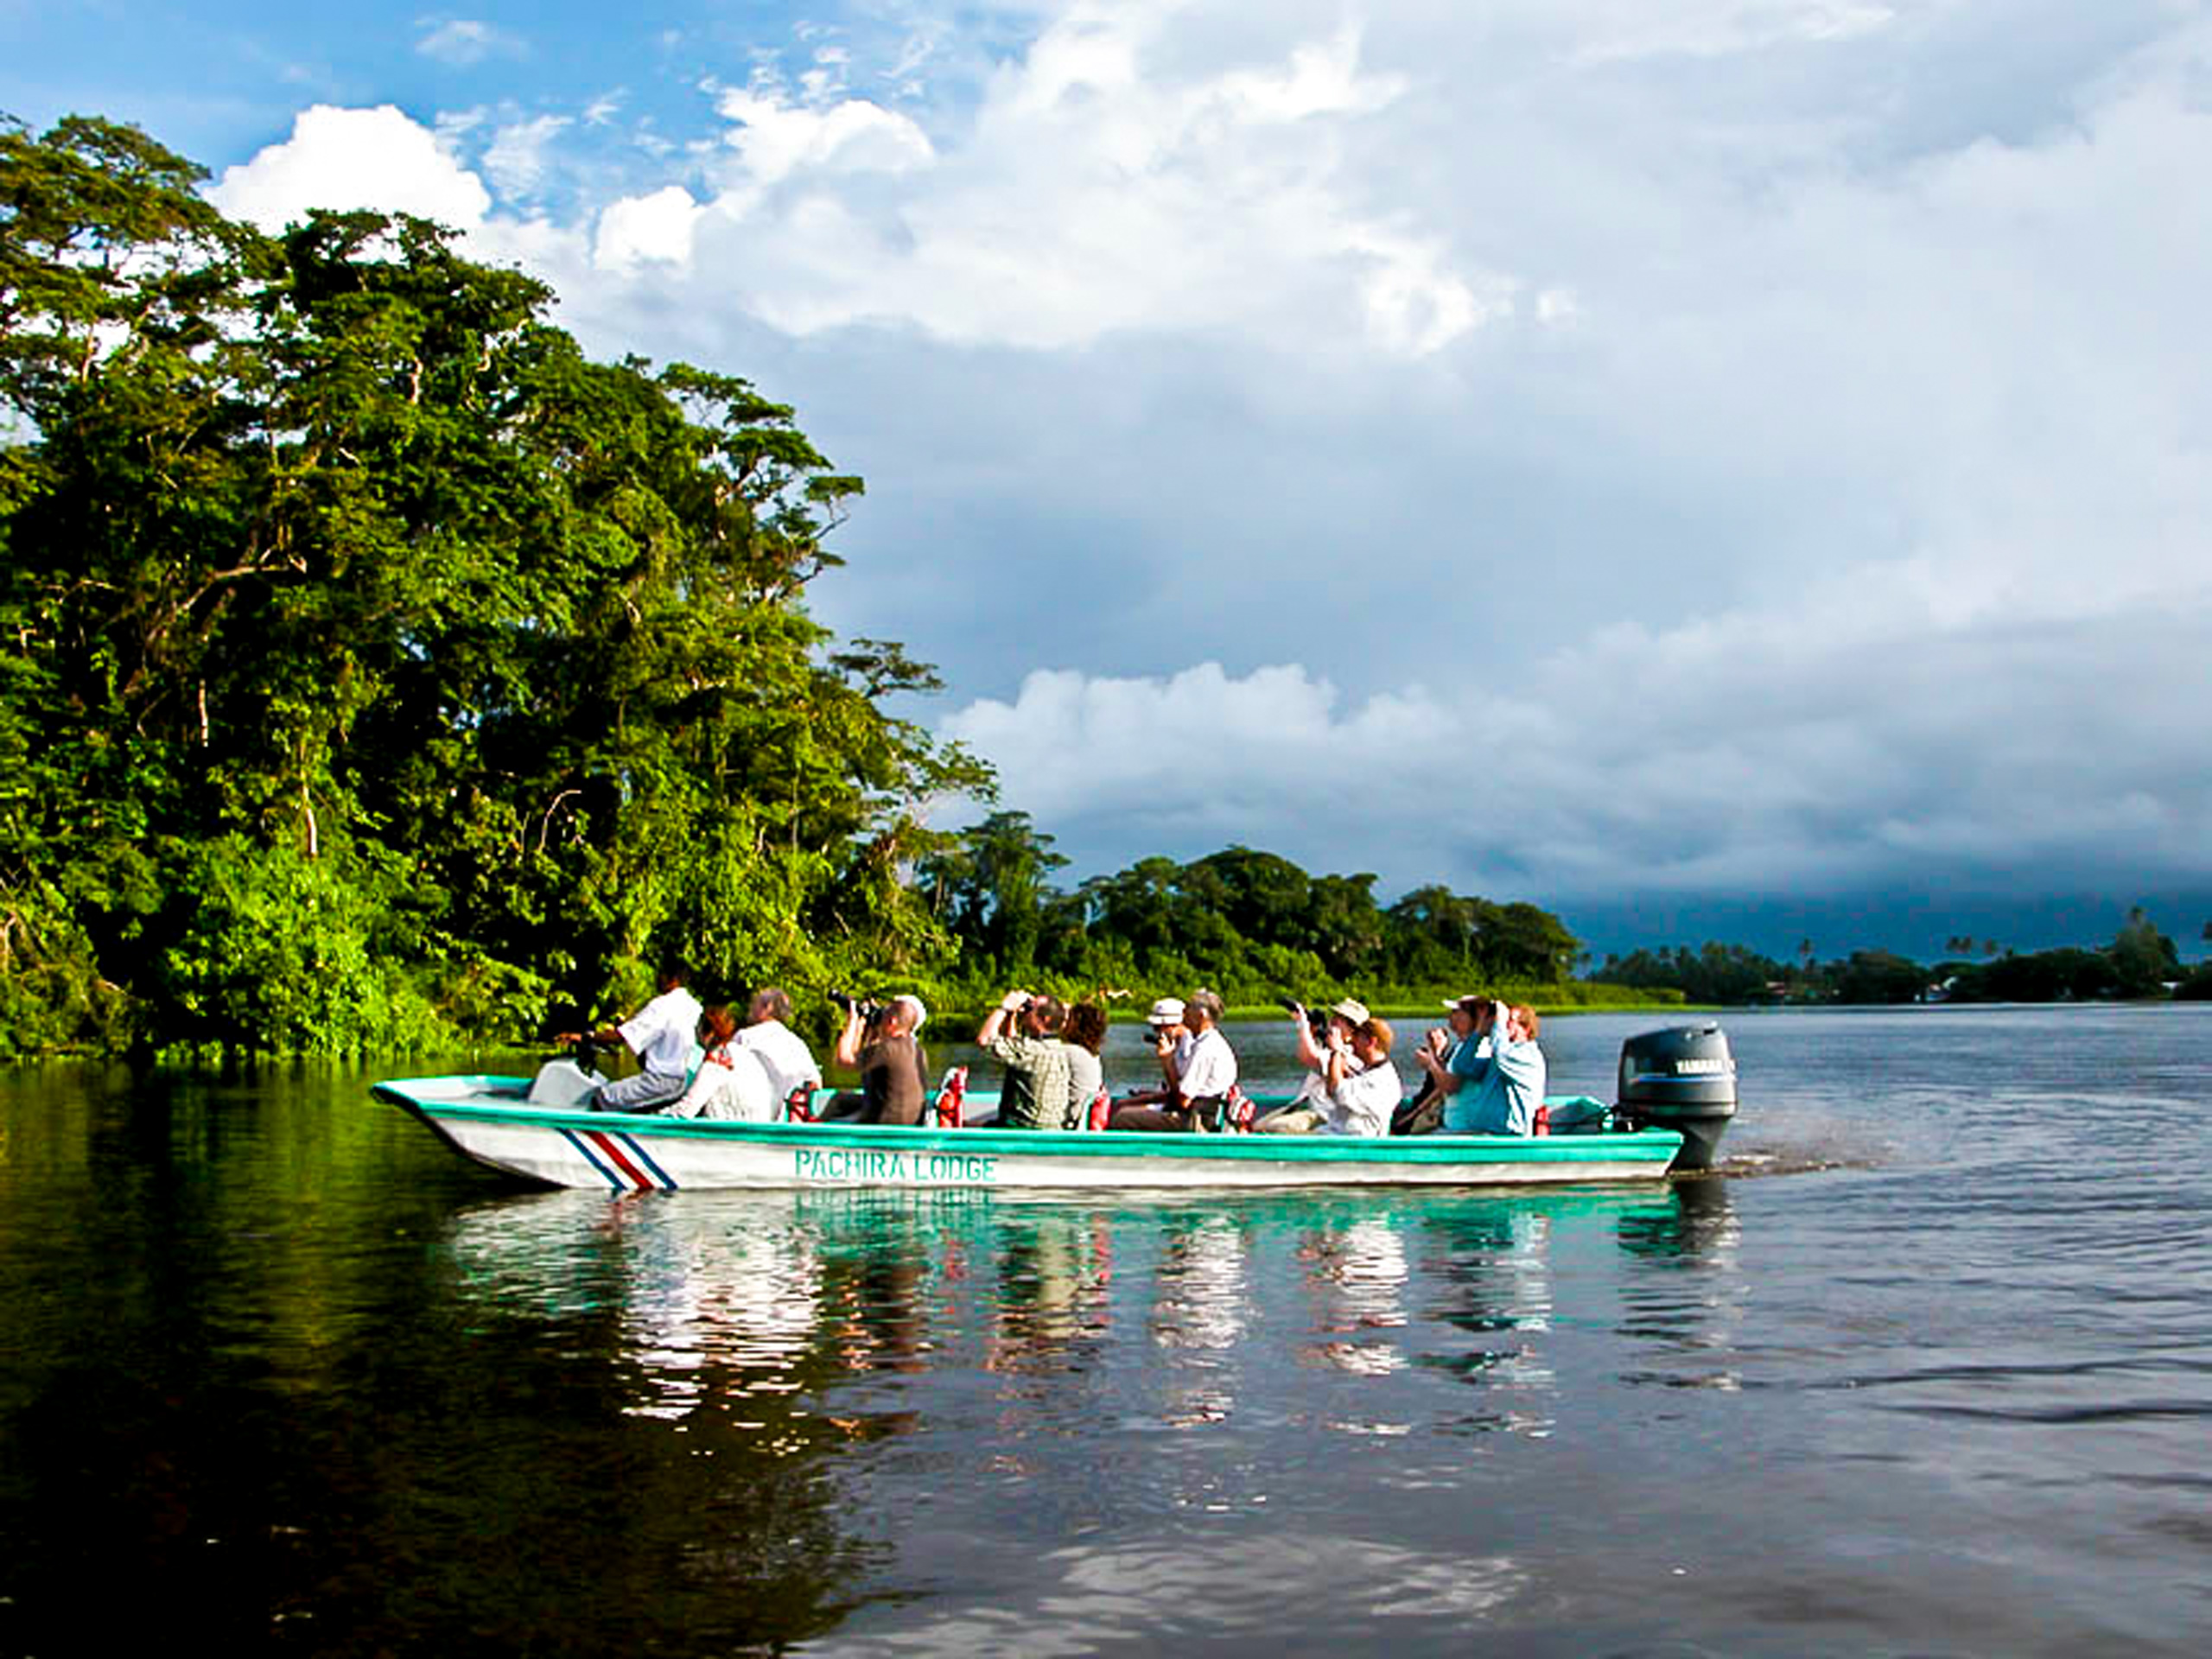 Tortuguero Canals boat traveling